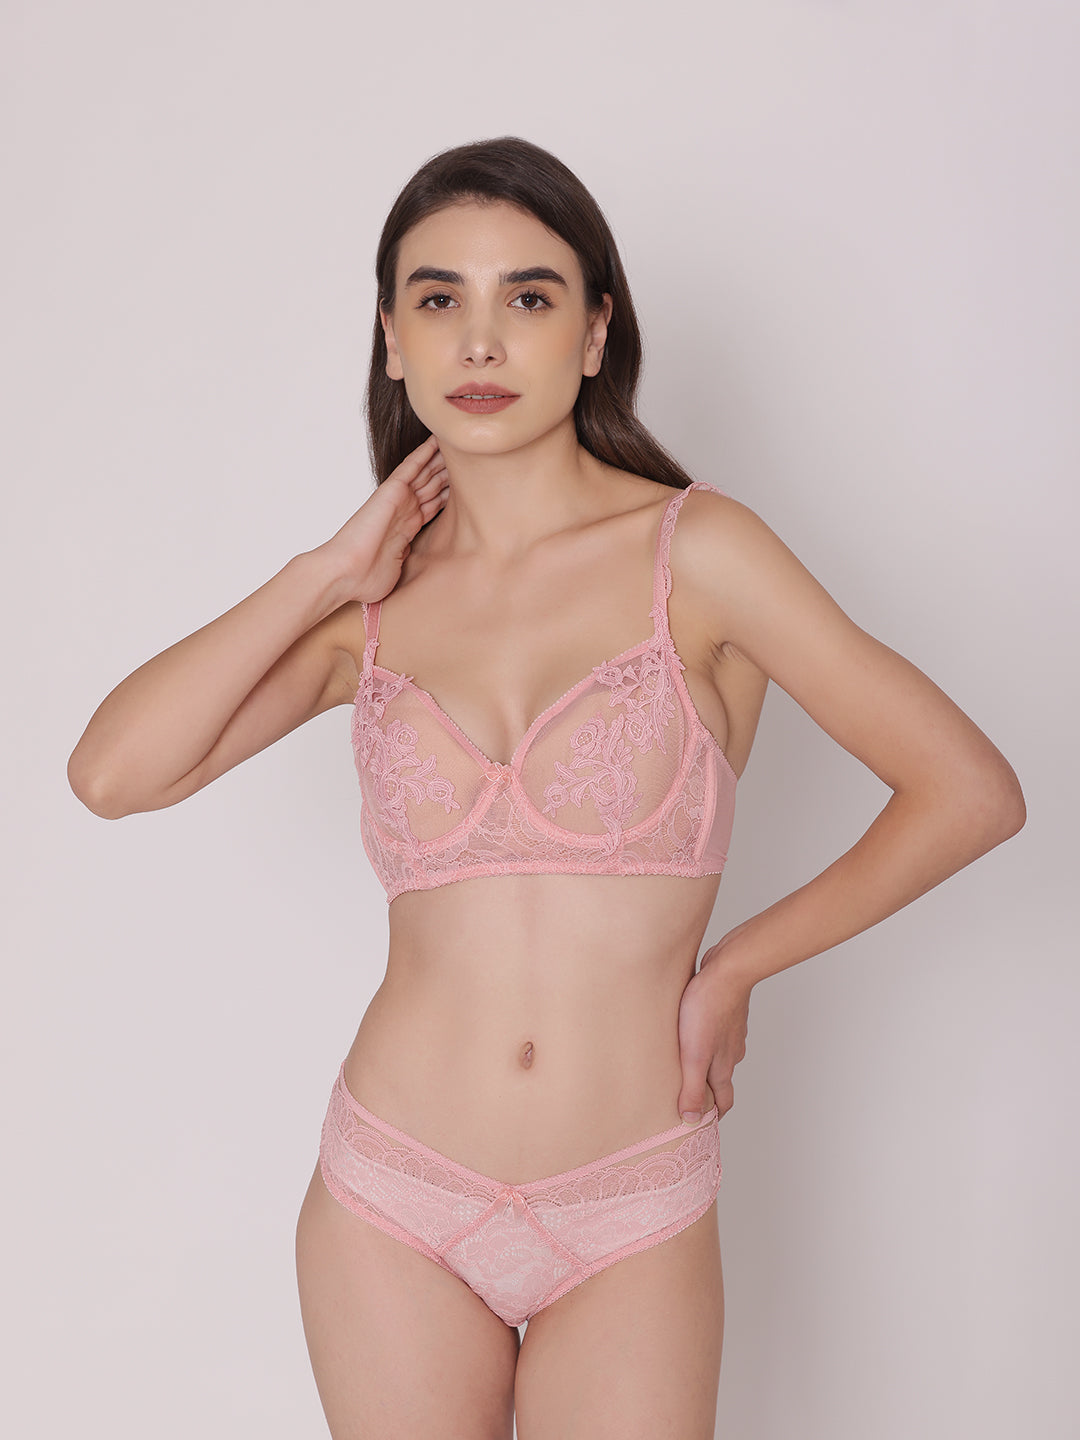 Taylor- Cute Bra Set with sexy brief (Pink, Black, Blue